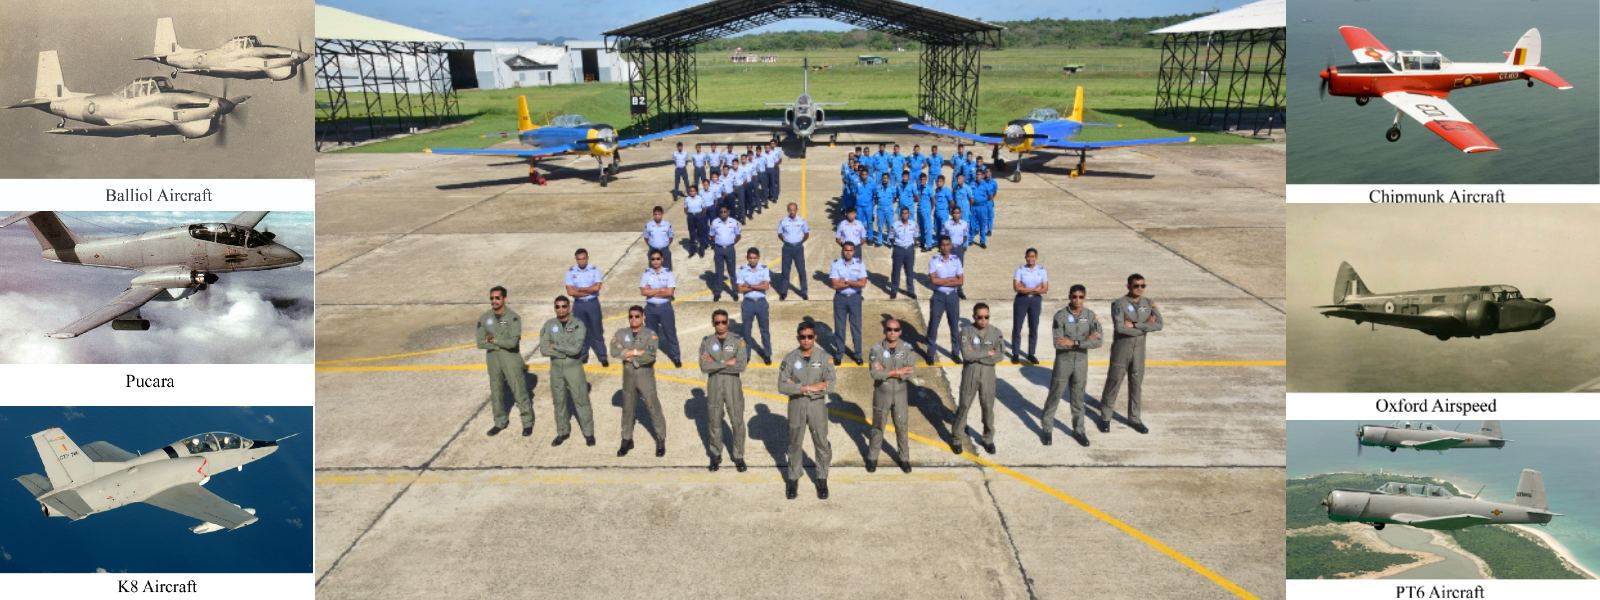 70 years for the “Cradle of Military Aviators”